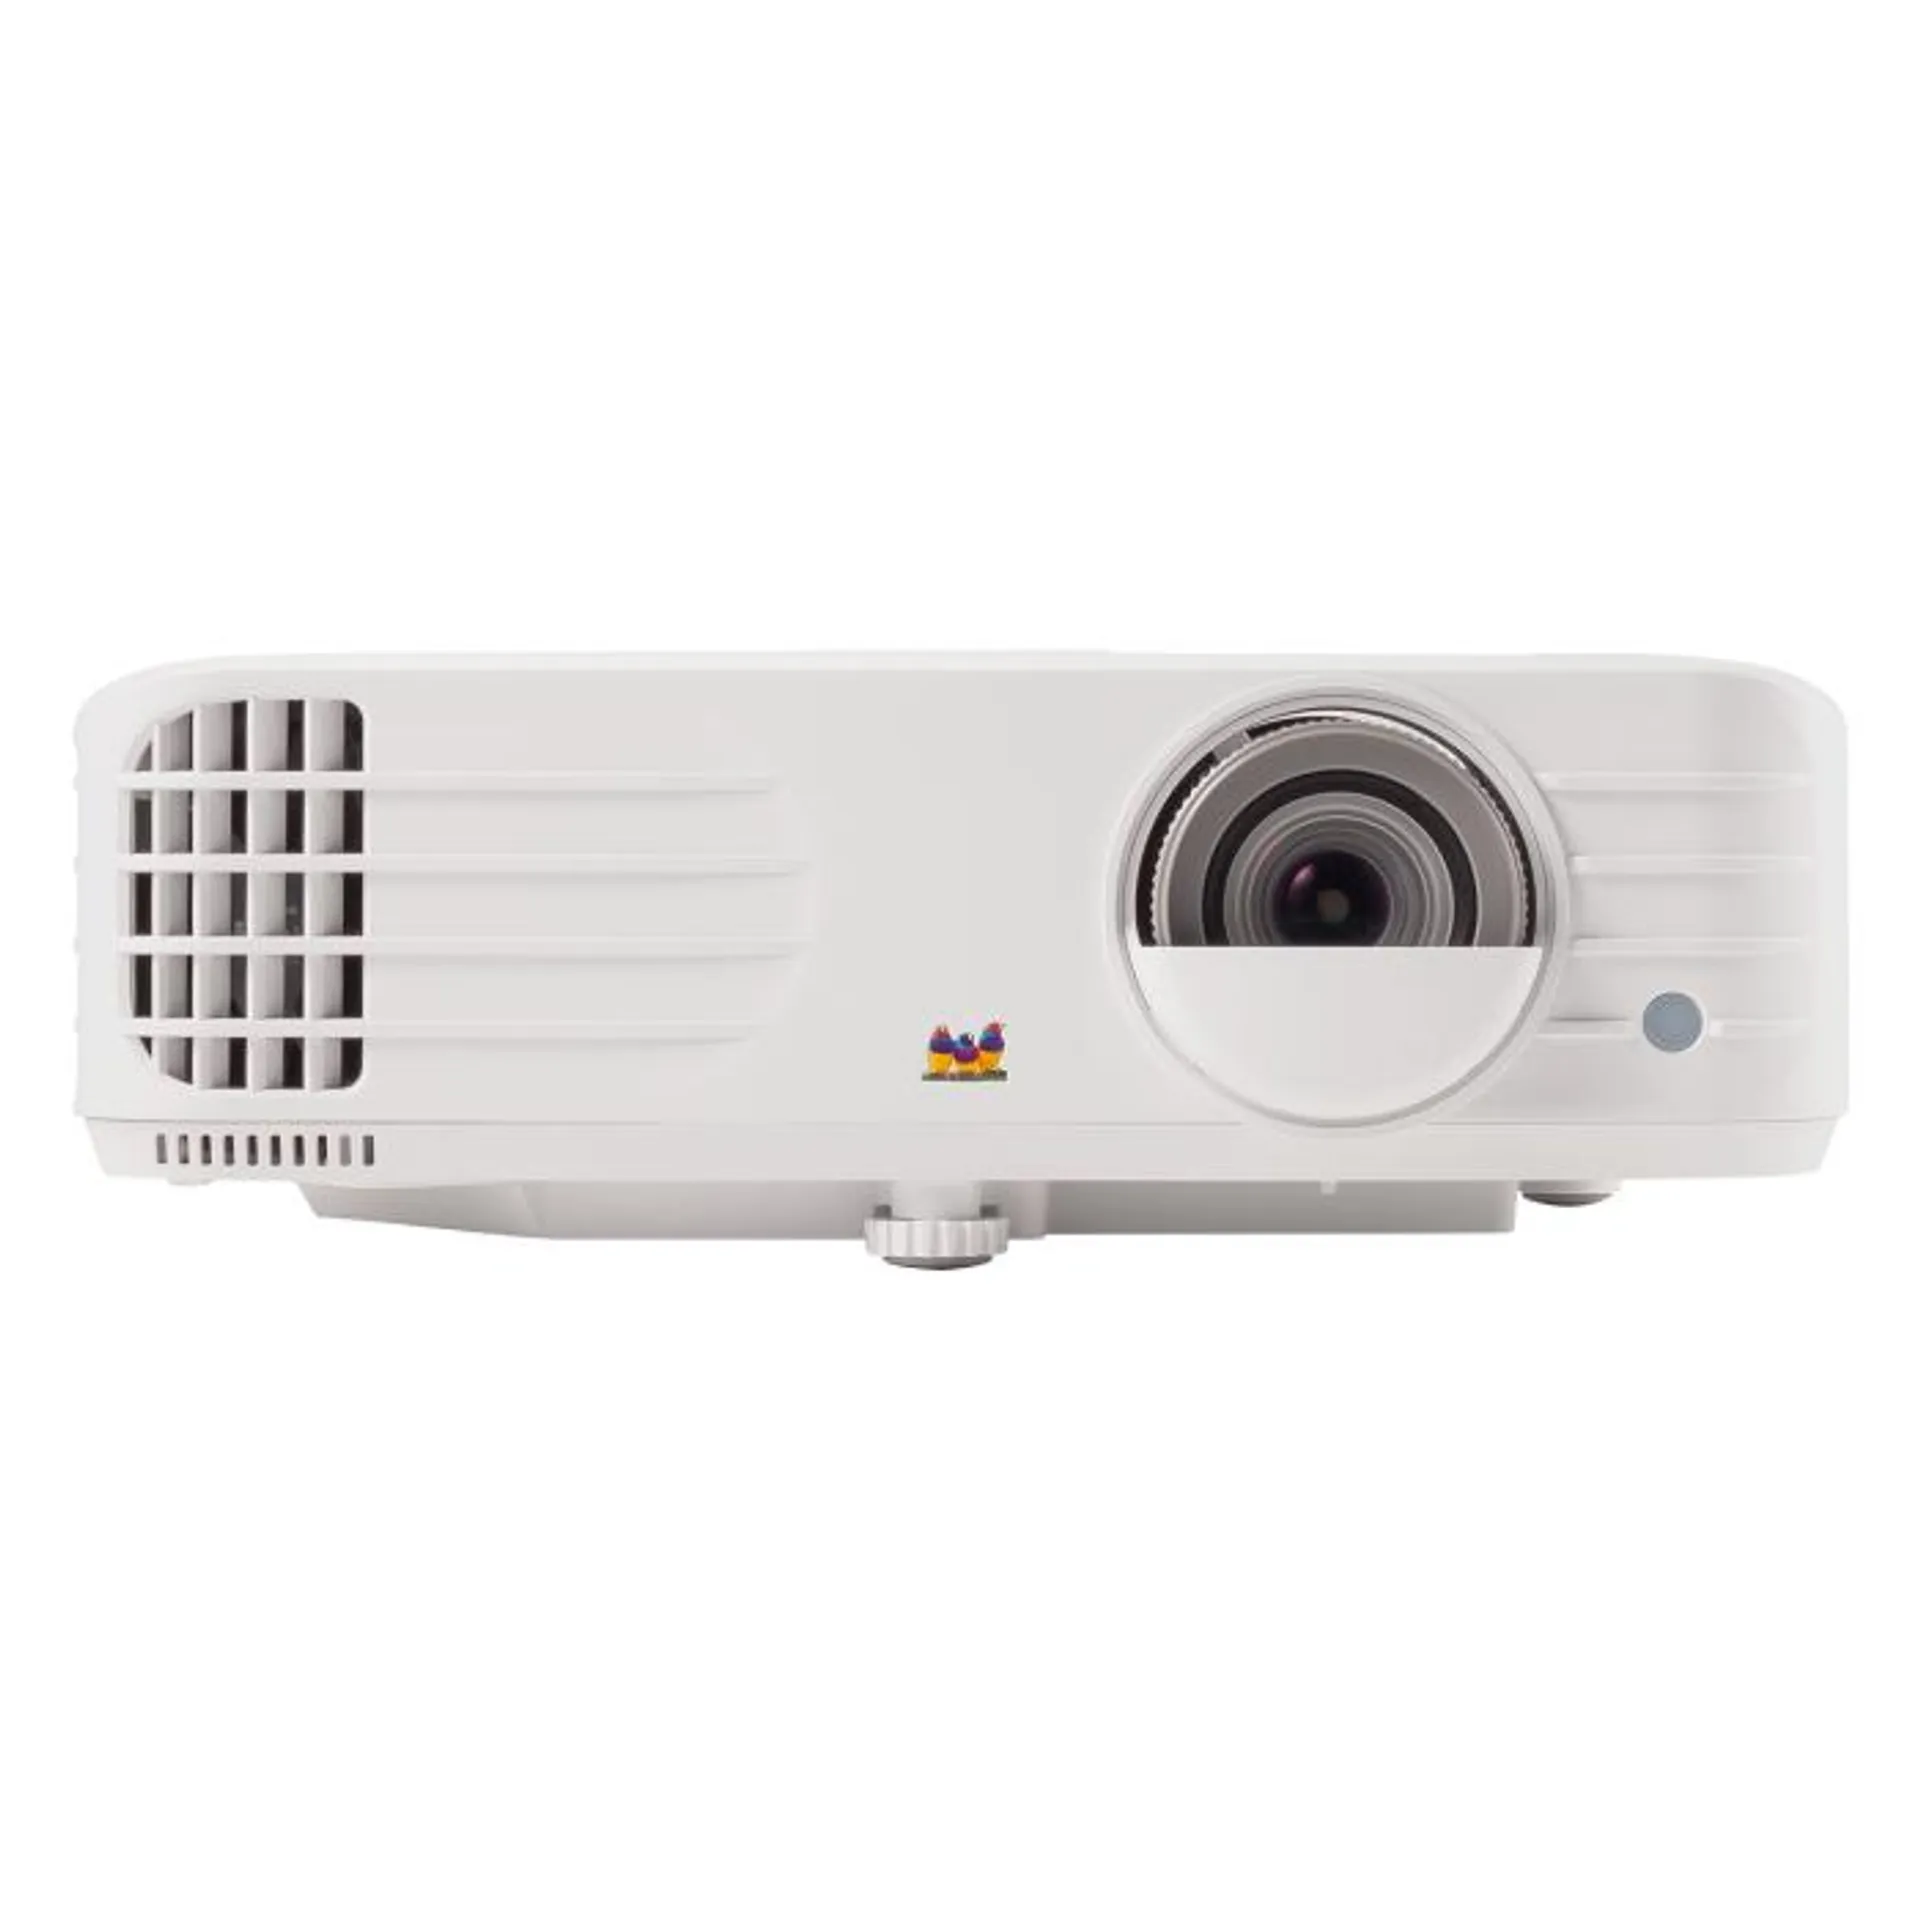 PX701-4K - 4K UHD Projector with 3200 Lumens, 240Hz, 4.2ms for Home Theater and Gaming